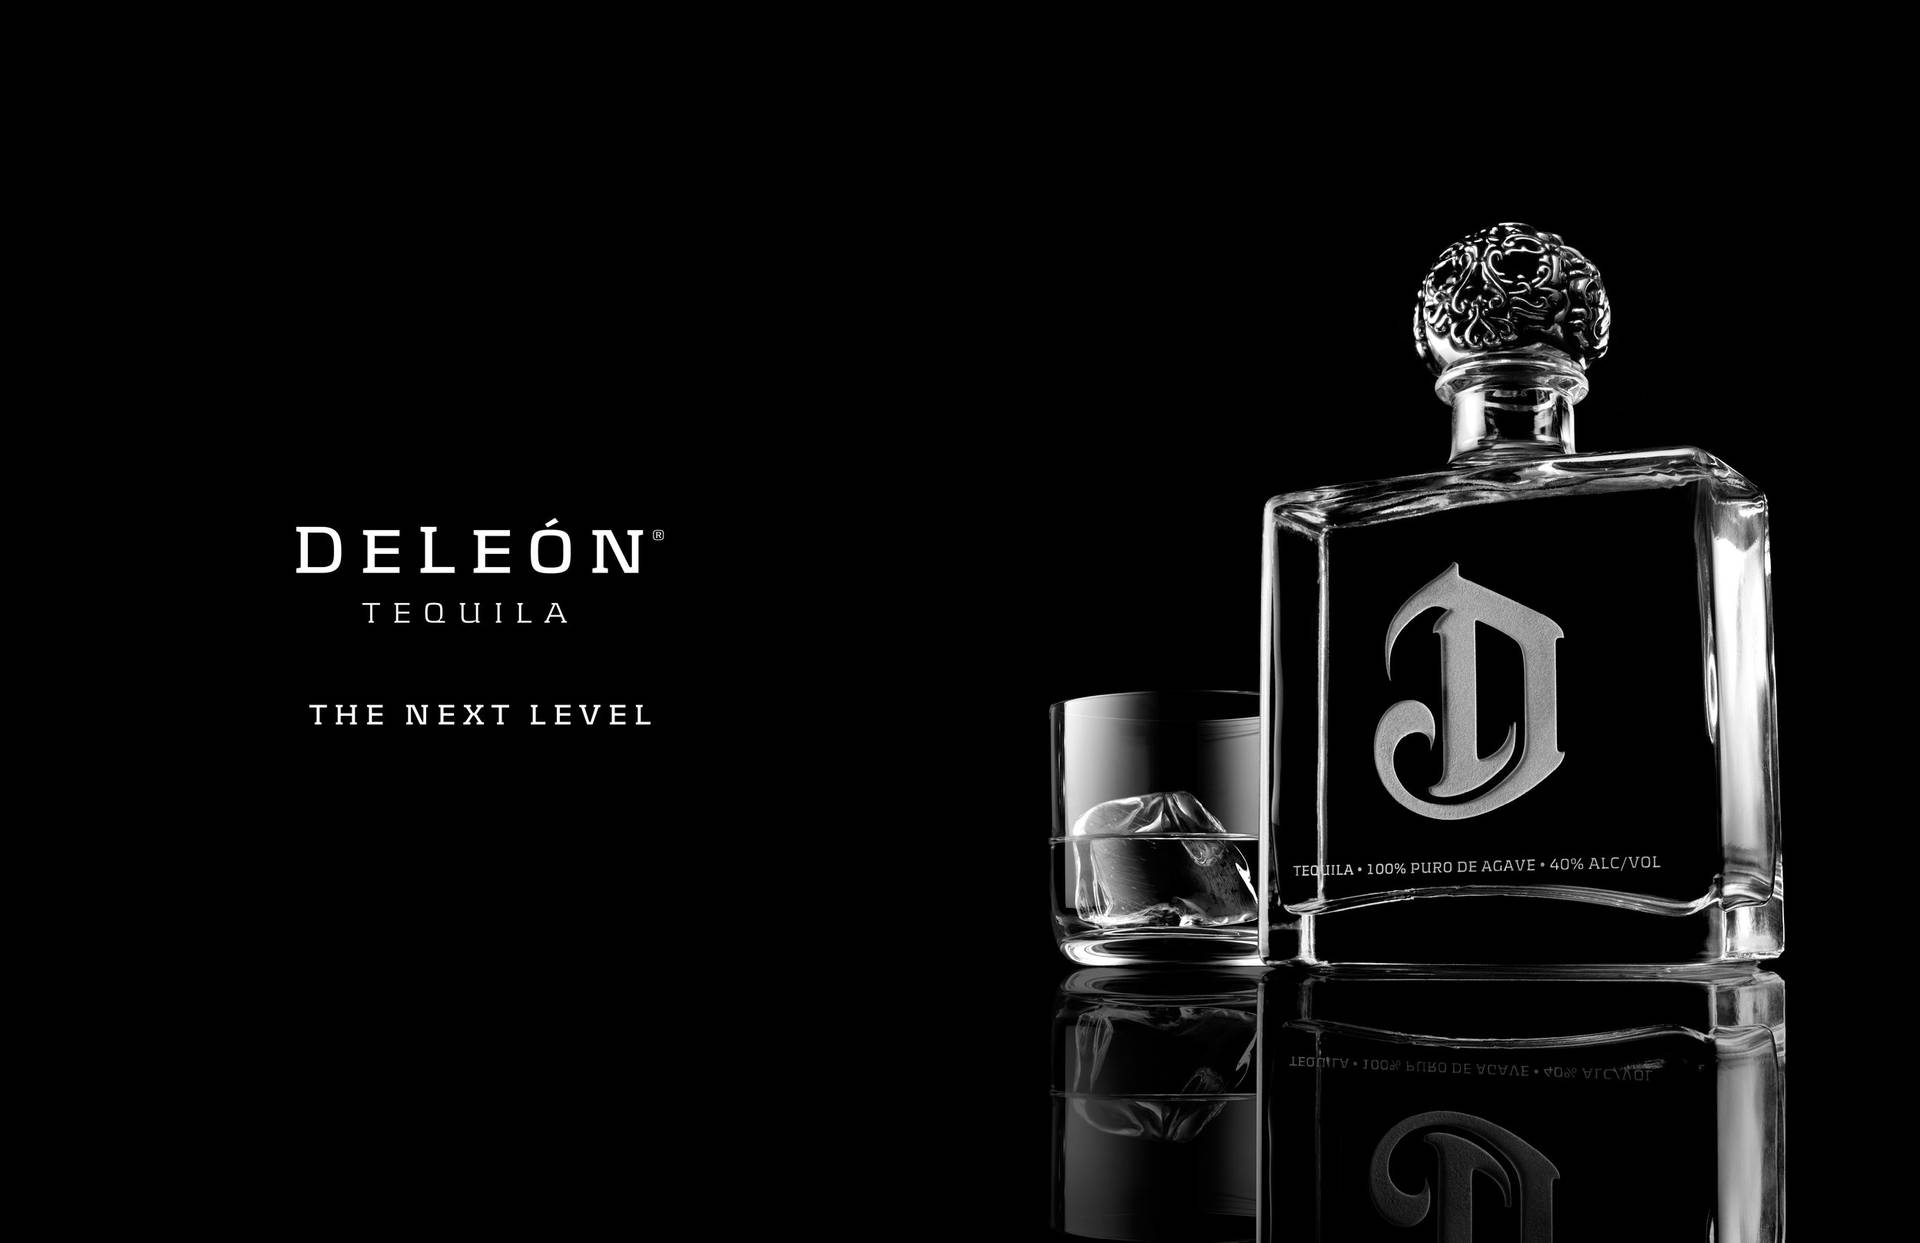 Deleón Tequila Bottle And Ice Glass Picture